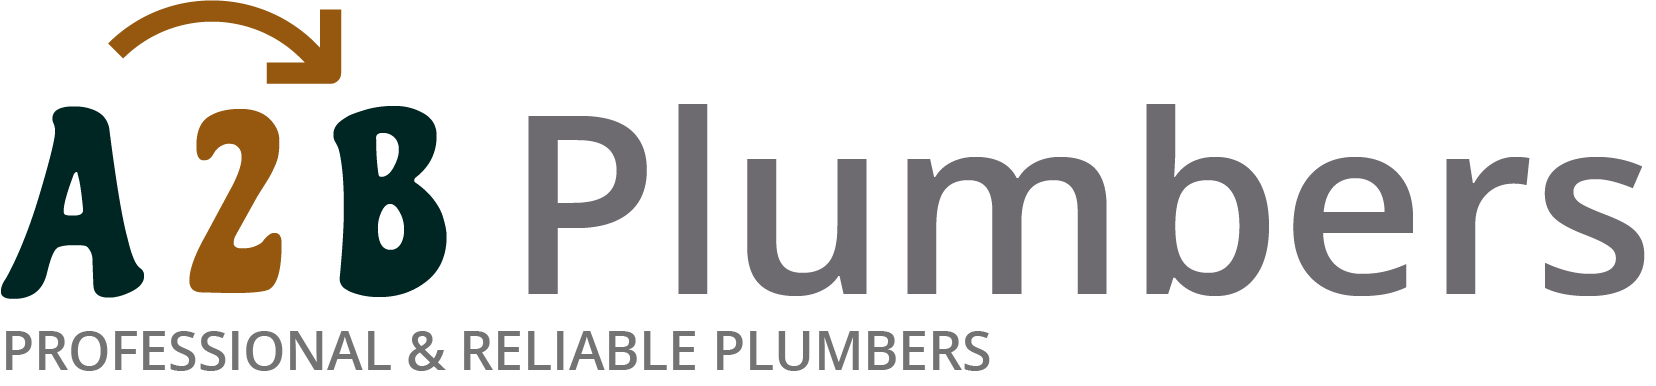 If you need a boiler installed, a radiator repaired or a leaking tap fixed, call us now - we provide services for properties in Durham and the local area.